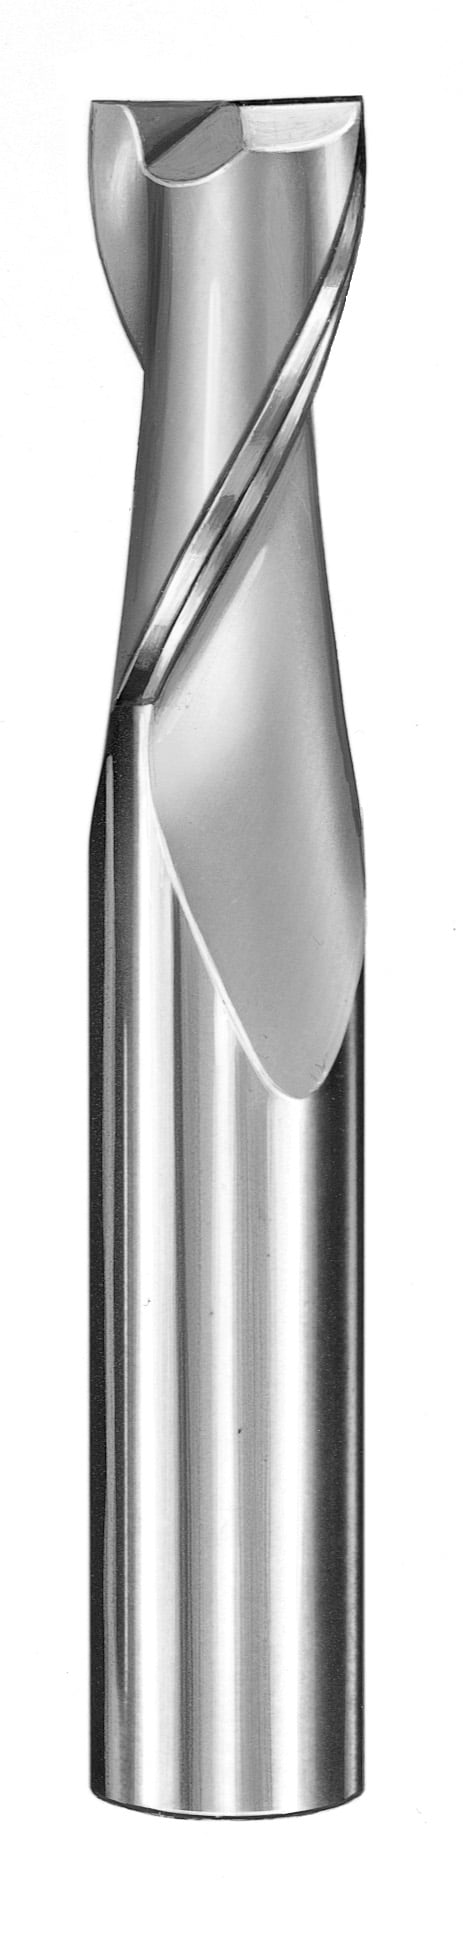 11/16" Dia, 2 Flute, Square End End Mill - 30369